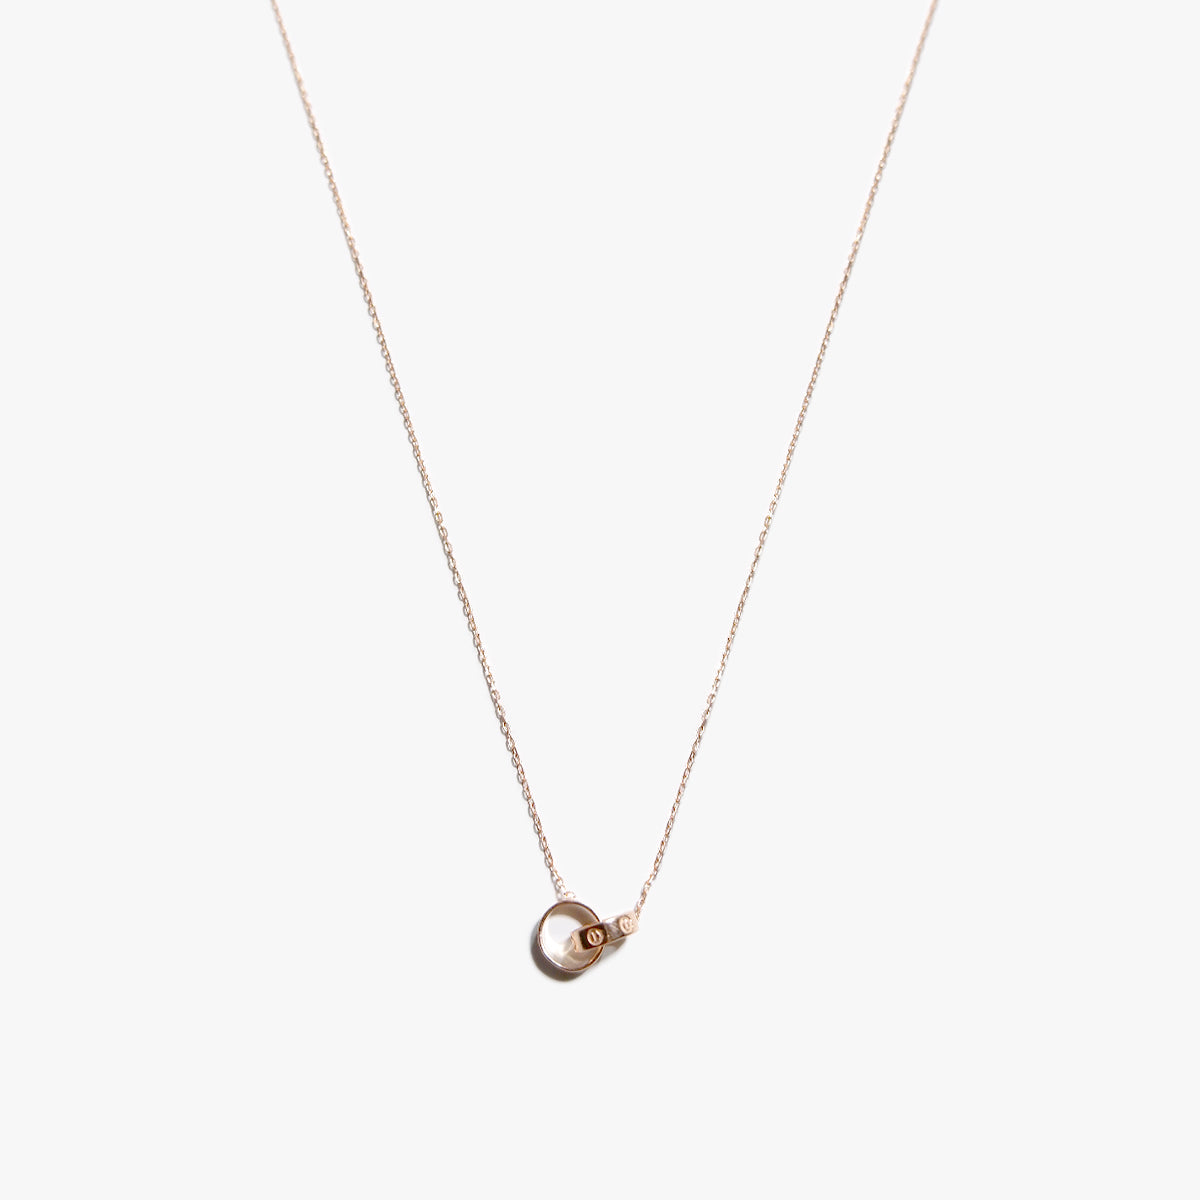 The Love Lightweight Necklace in Solid Gold